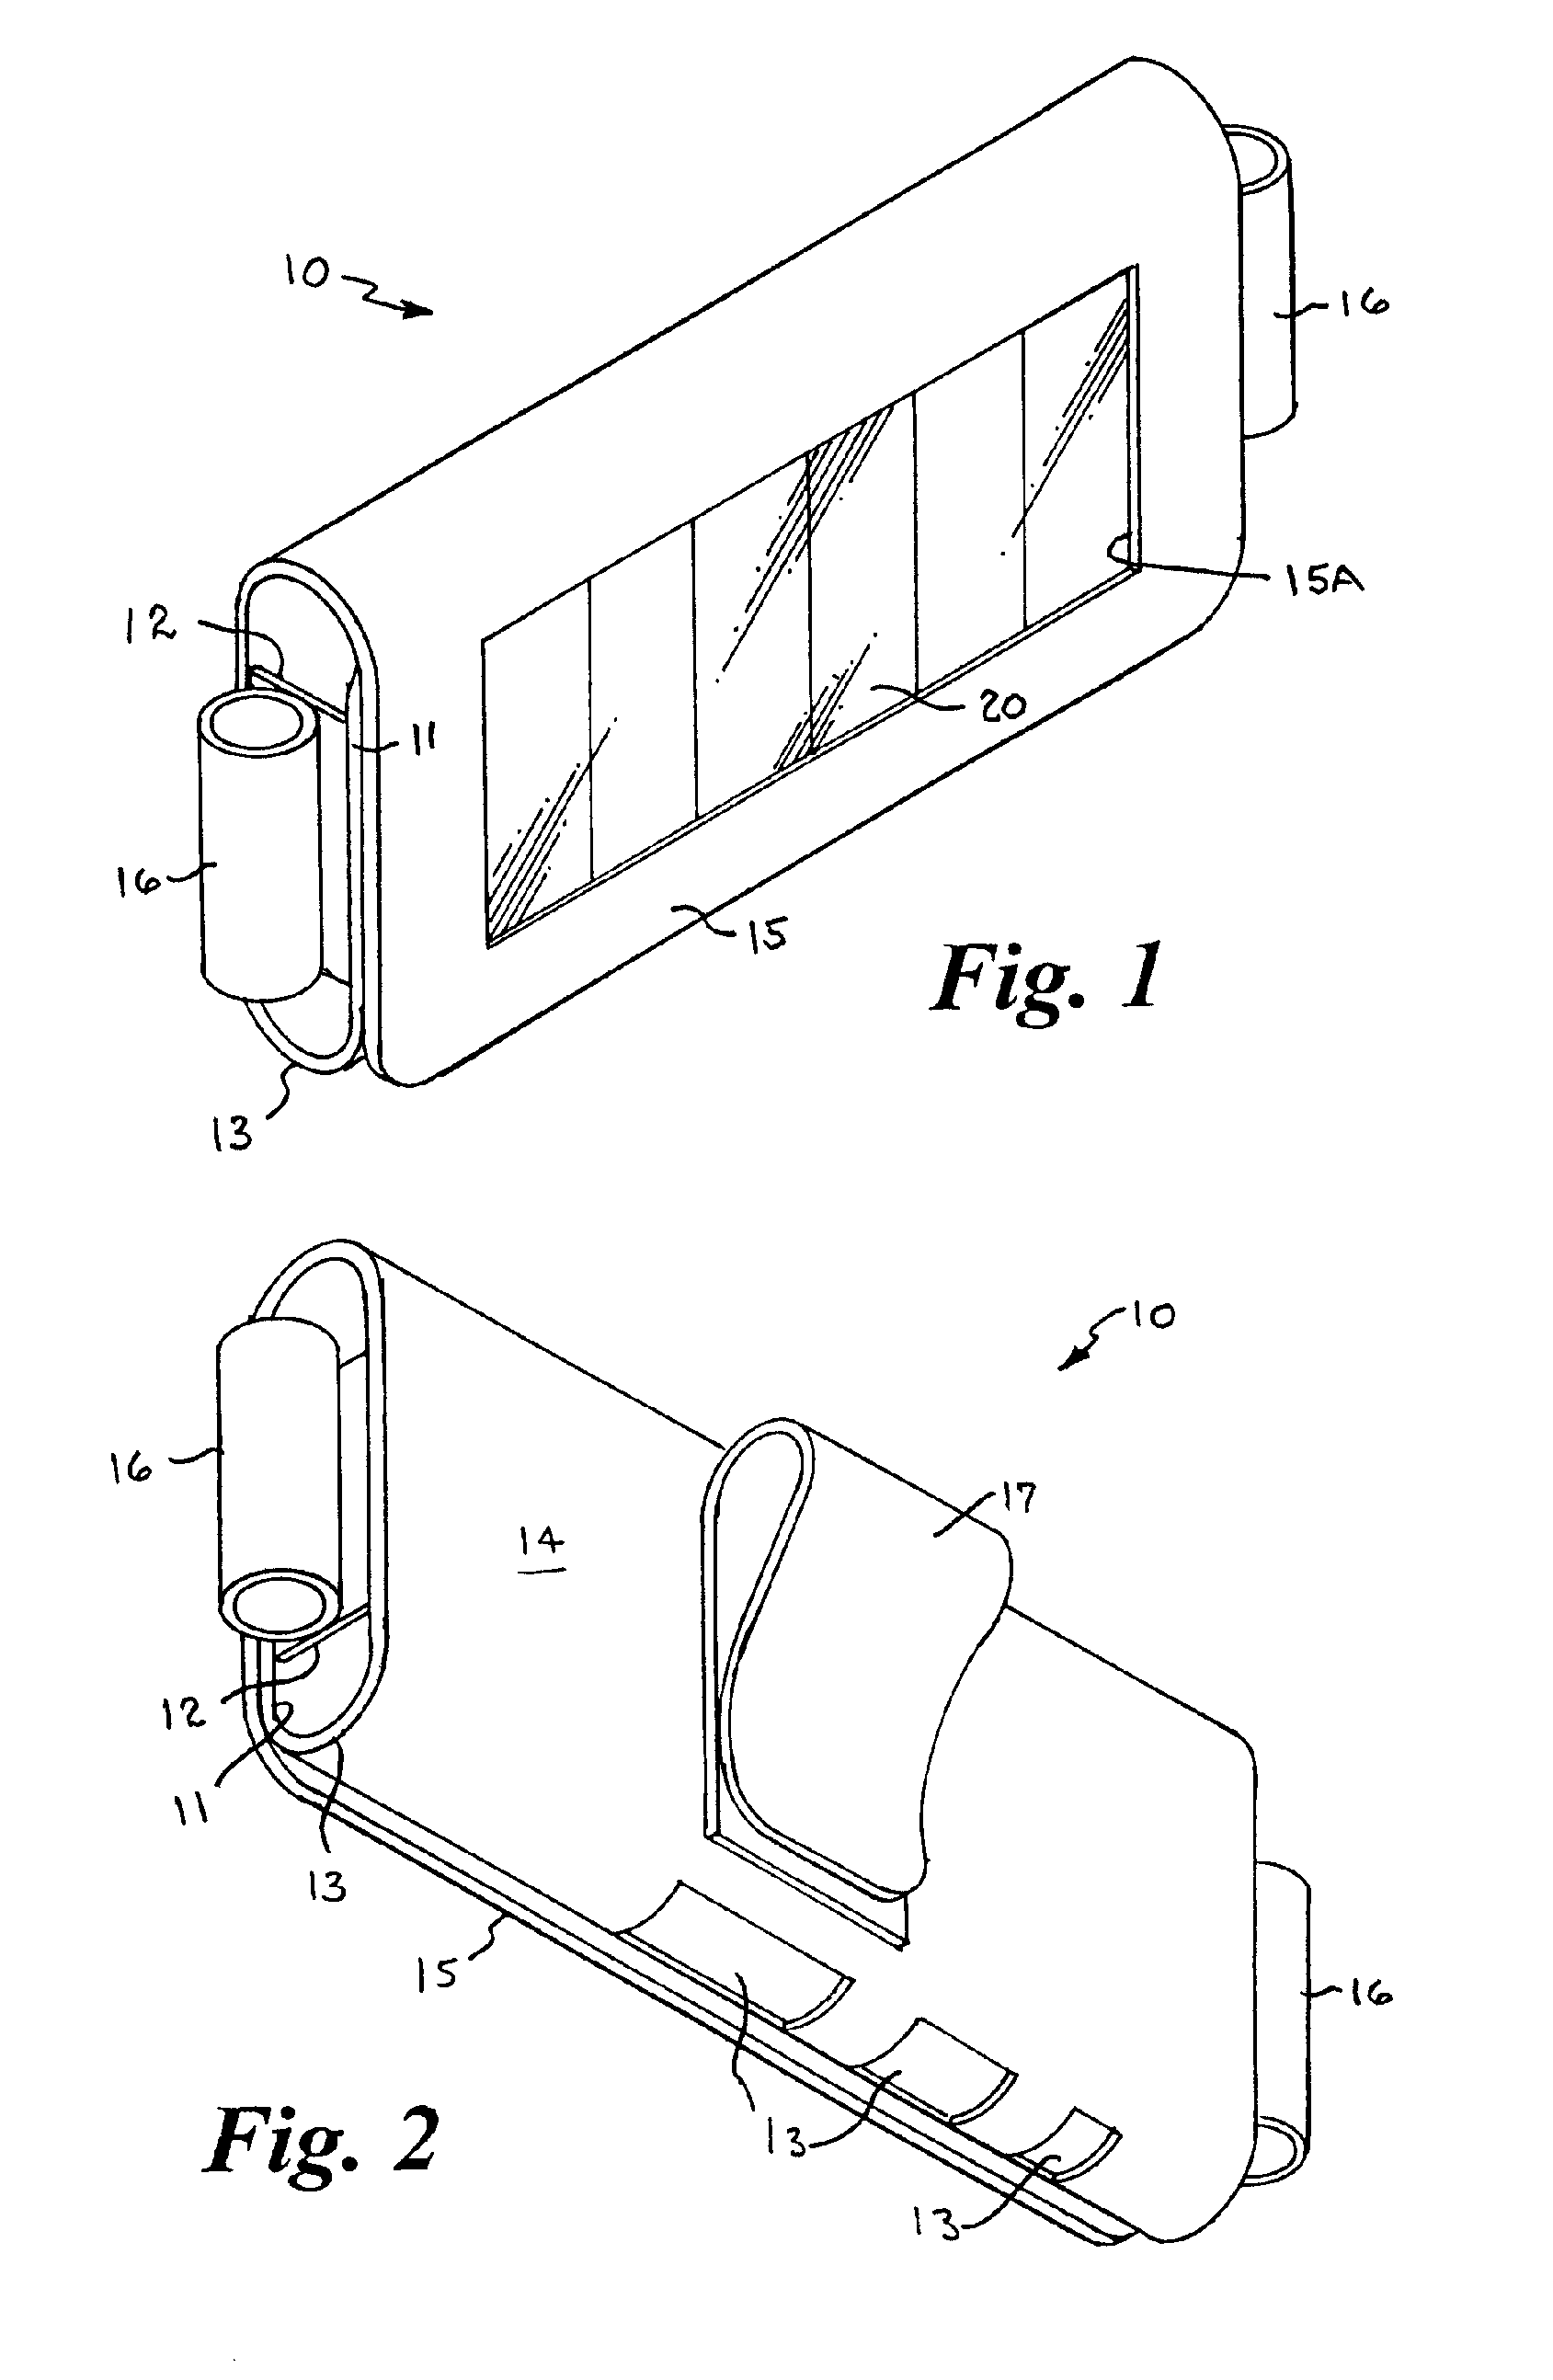 Universal charging holster for charging and transporting portable electronic devices